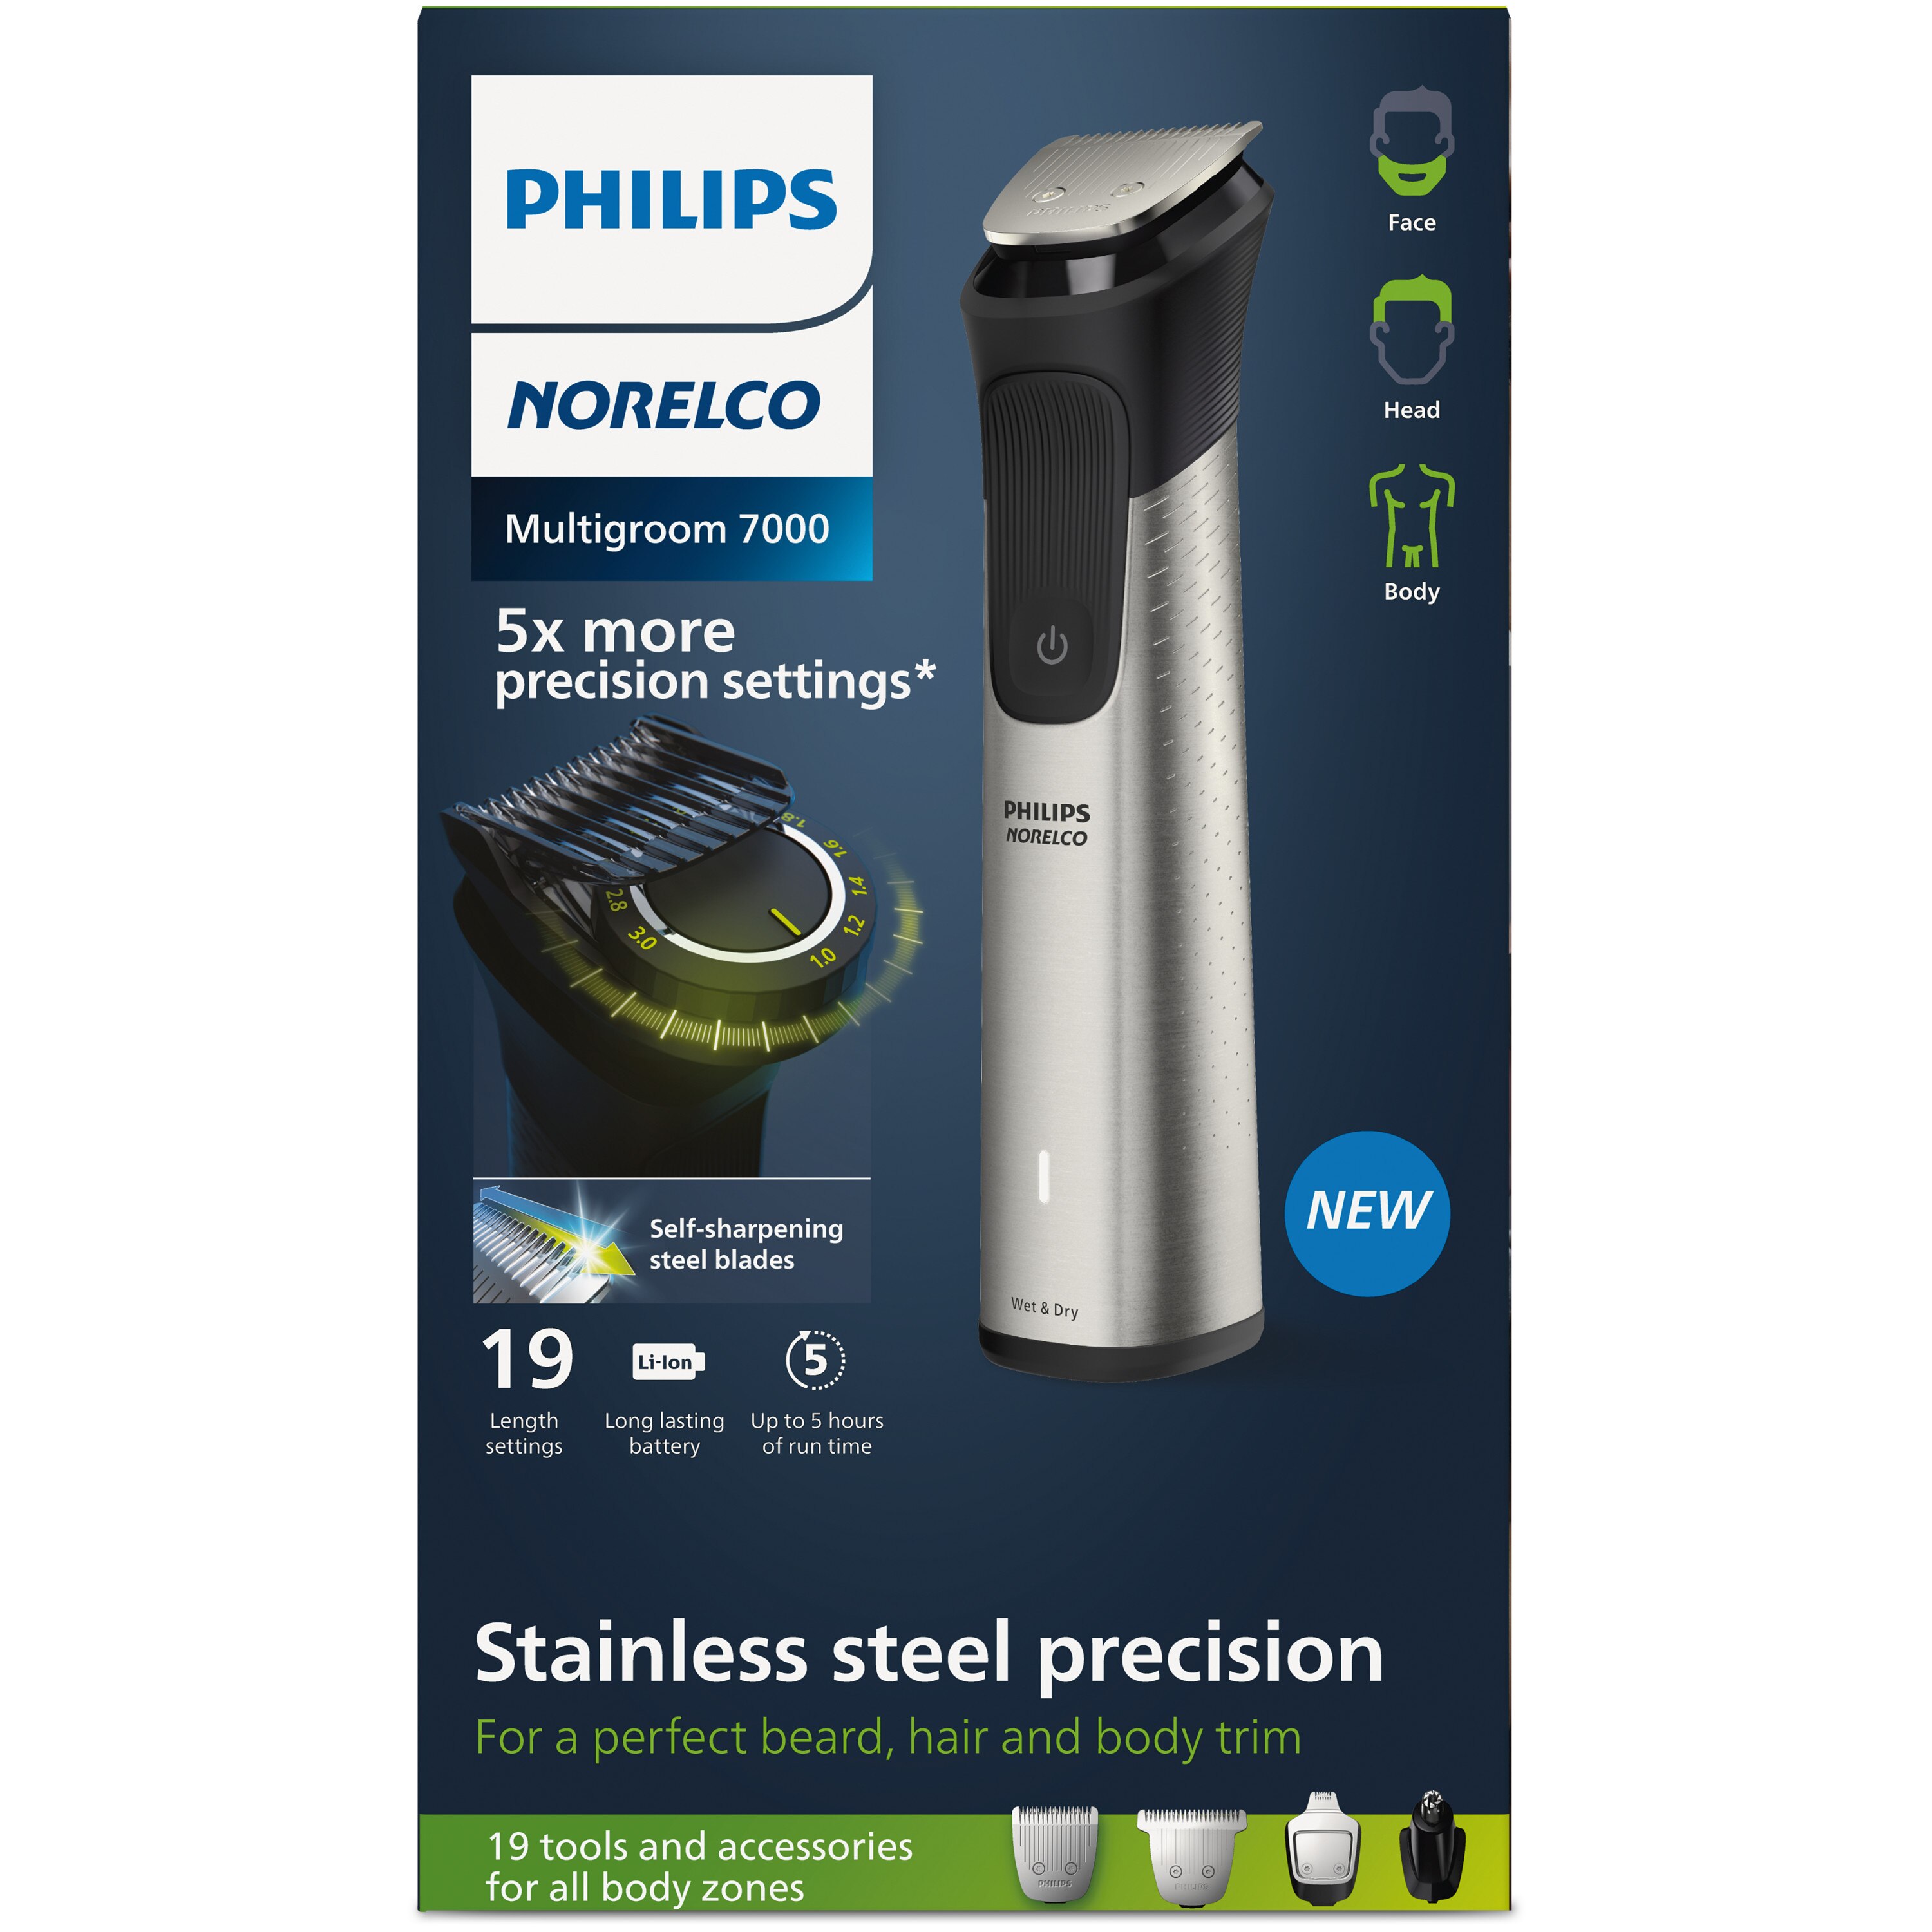 Philips Norelco Multigroom Series 7000, 23 Piece Mens Grooming Kit Face, Head and Body